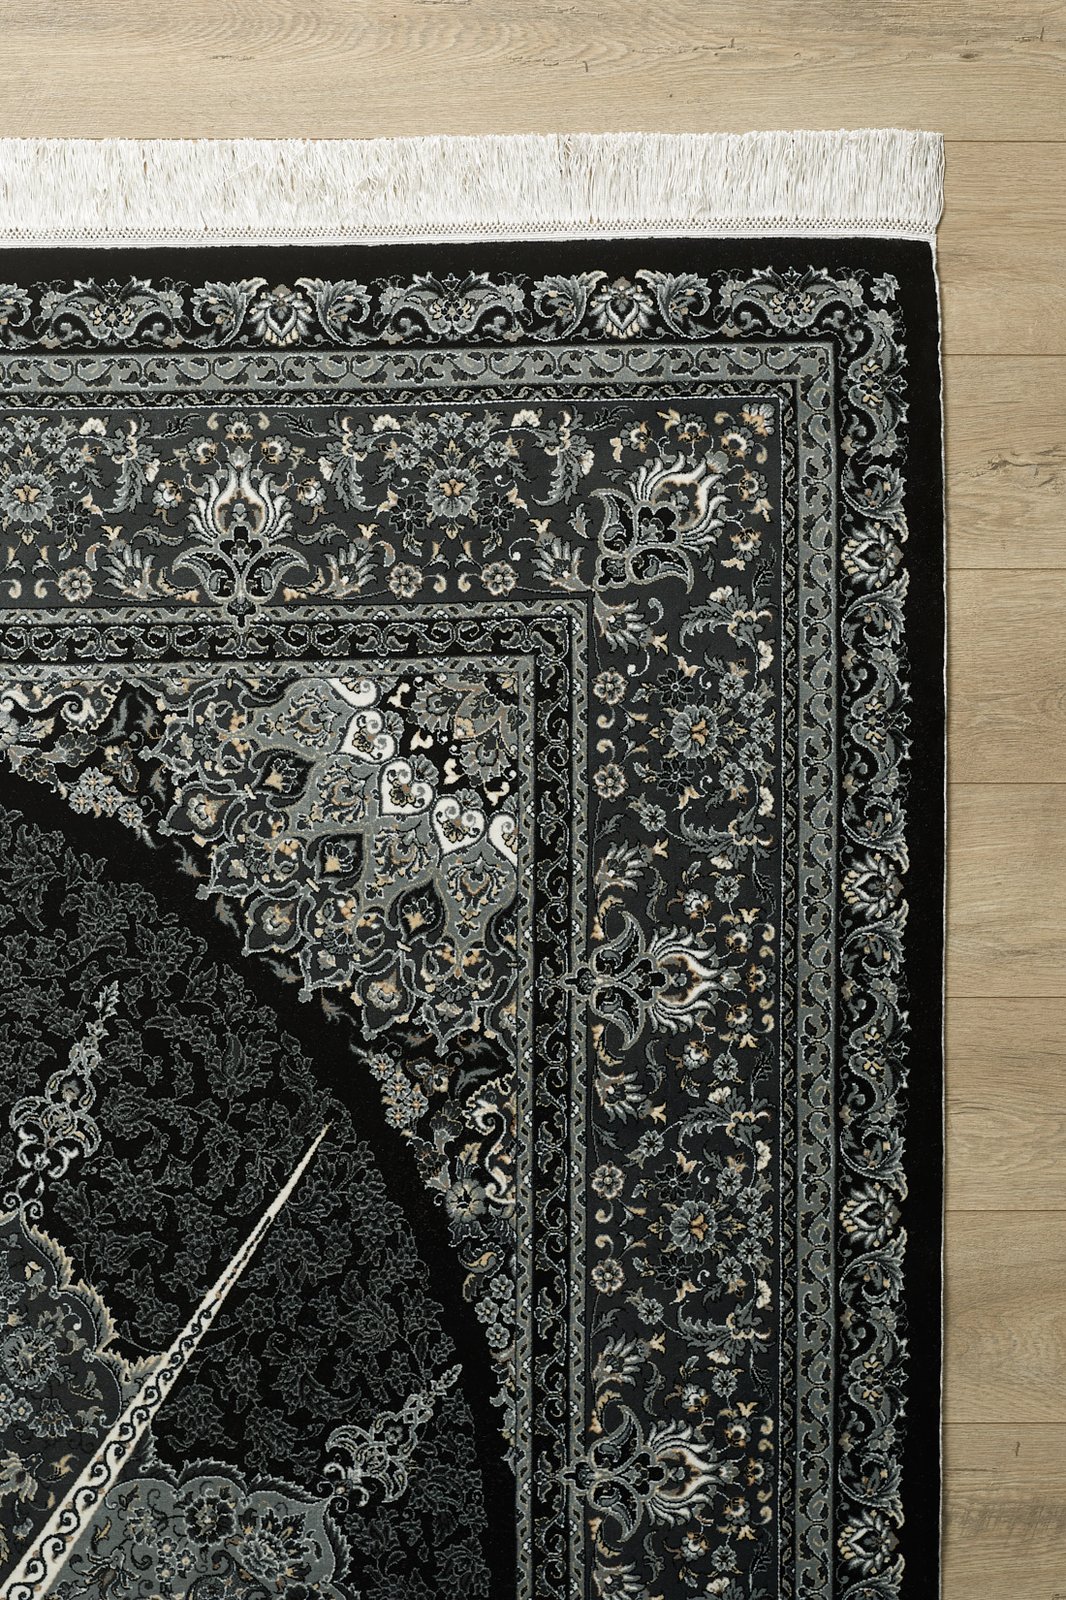 Grandeur of the Sultans Medaillonteppich aus Seide – Obsidian – 1239I 